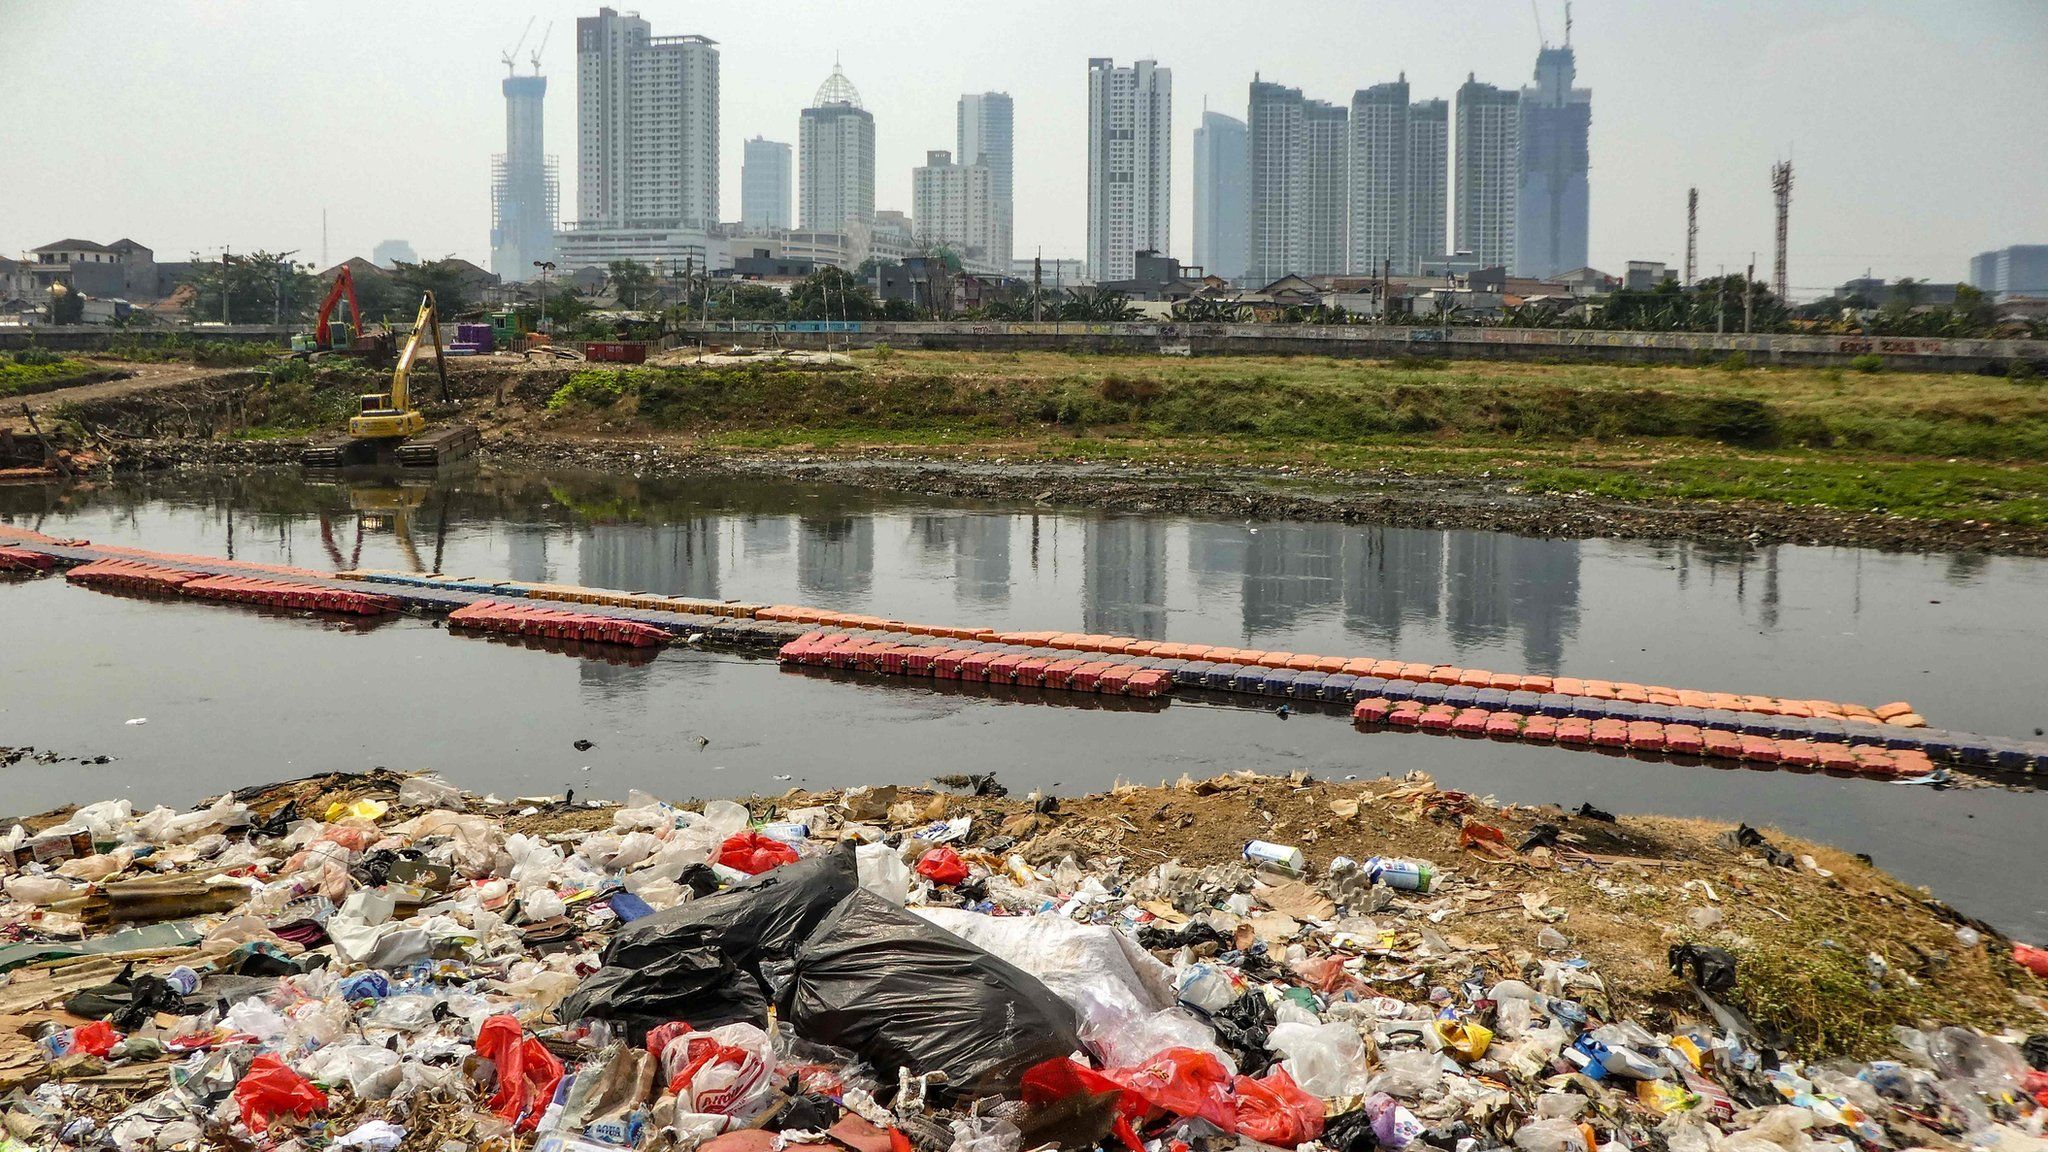 Plastic waste on the banks of a river with a view of the Jakarta skyline (file photo - August 2019)